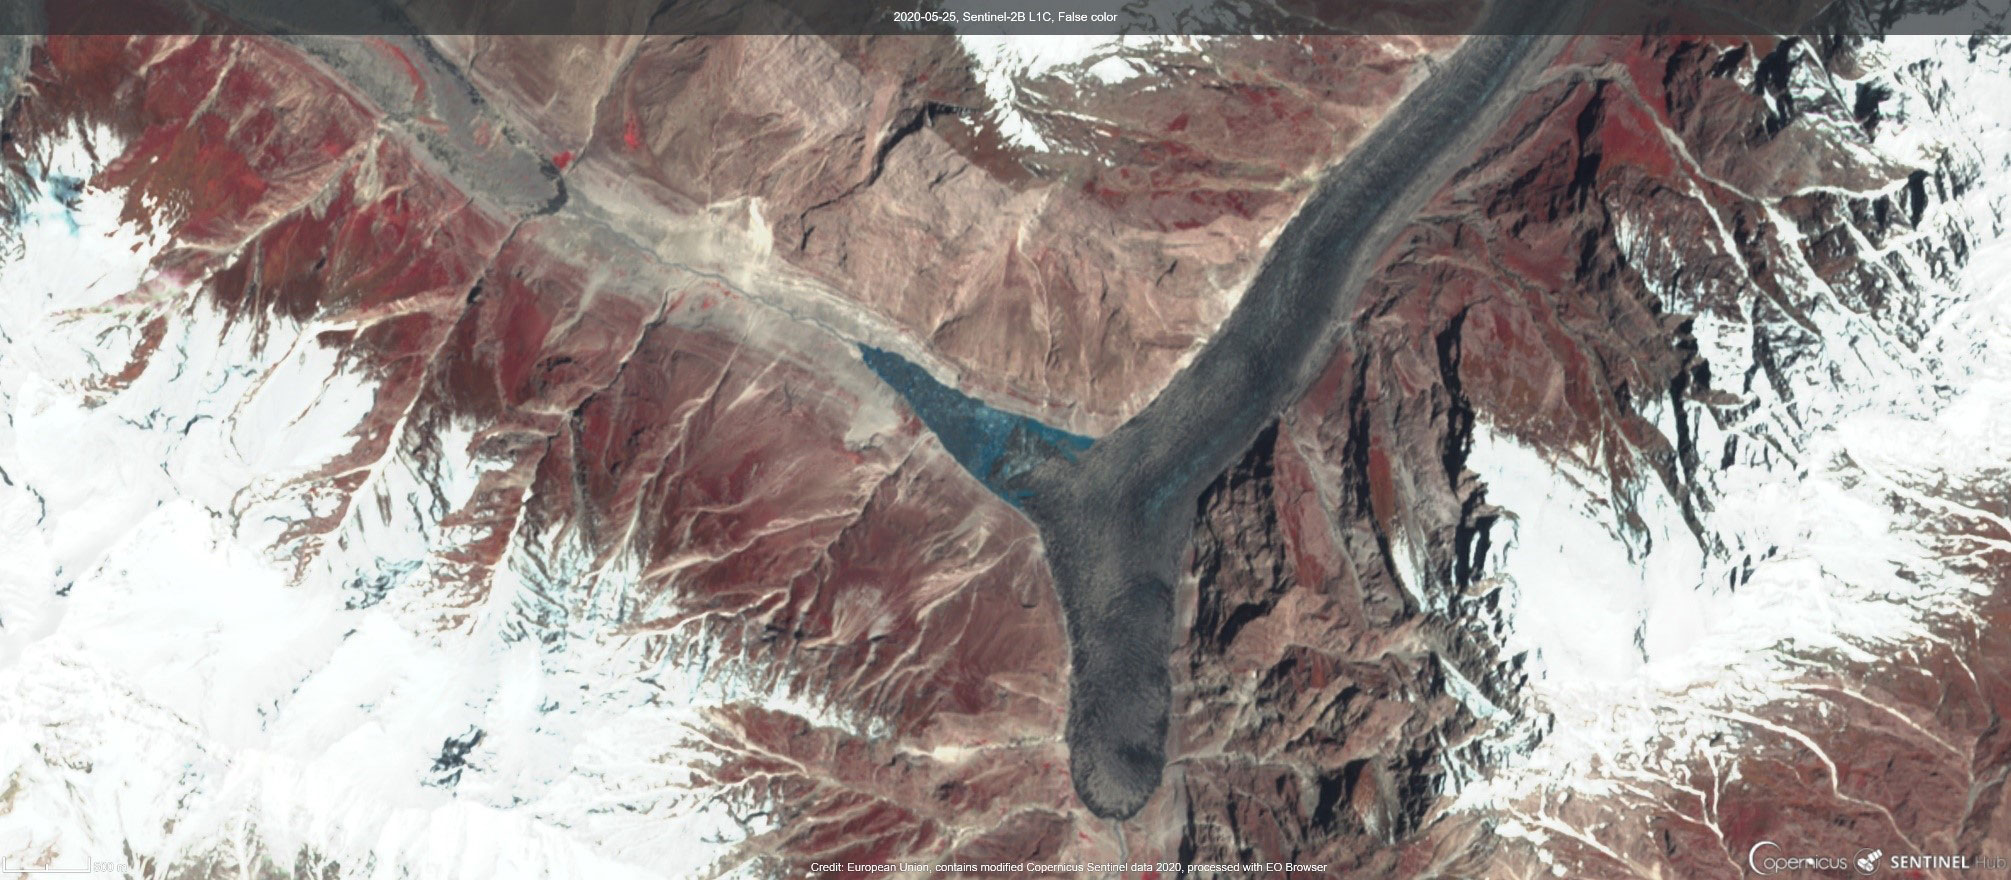 Satellite image from 25 May 2020 shows the lake extent before the outburst. 